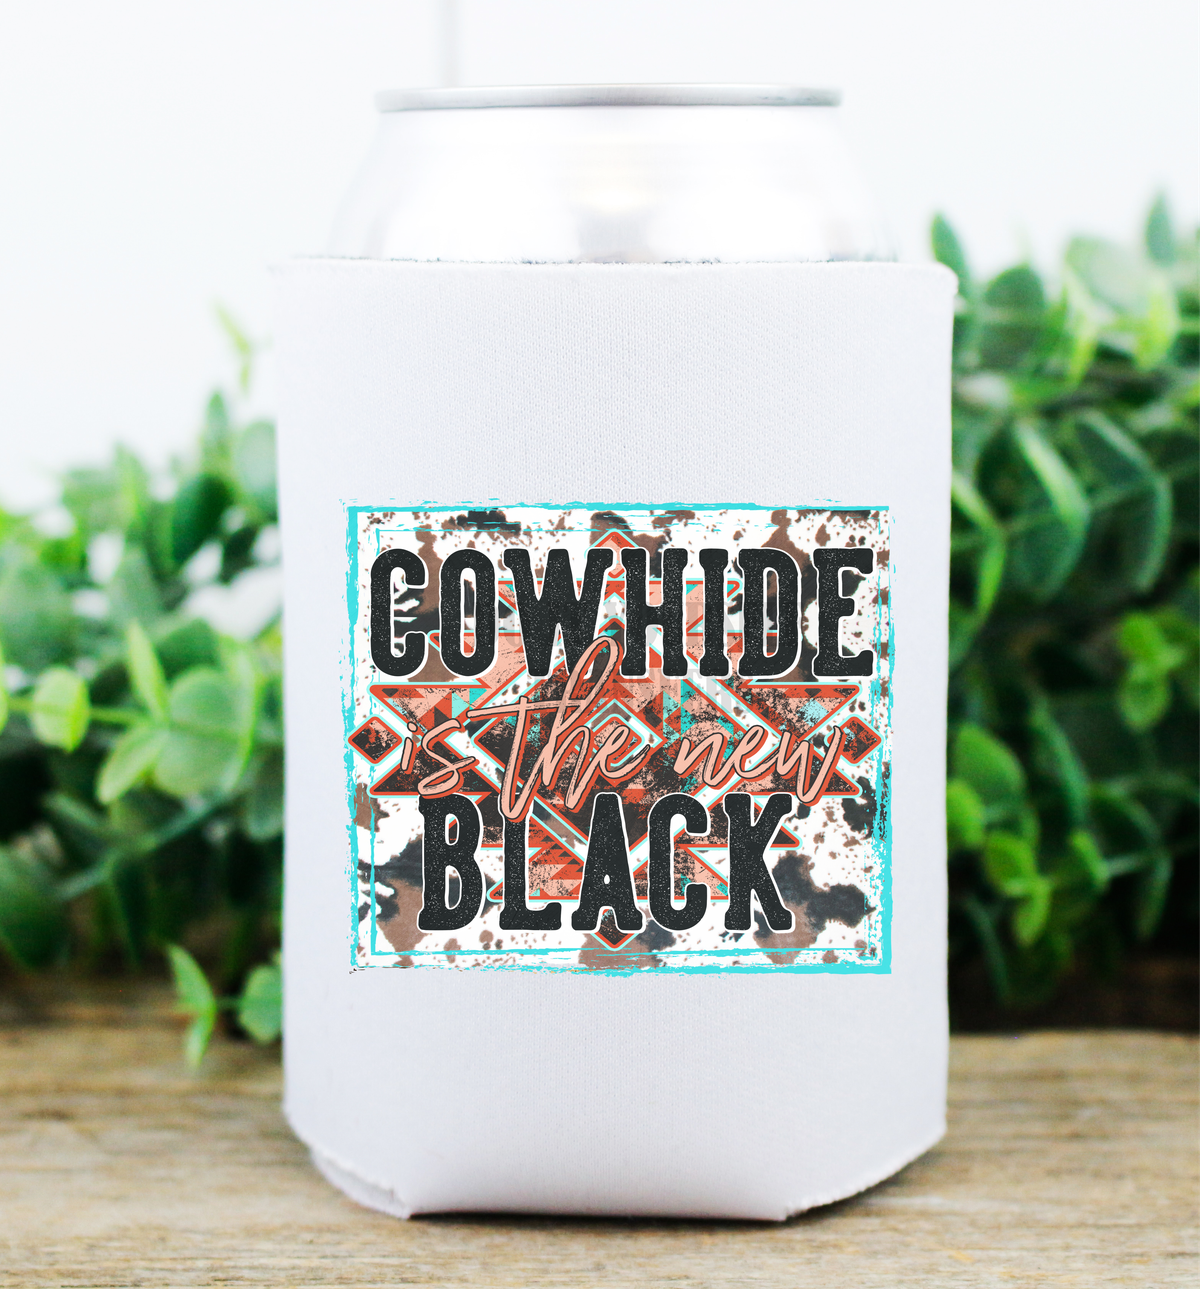 Cowhide is the new black frame  / size  DTF TRANSFERPRINT TO ORDER